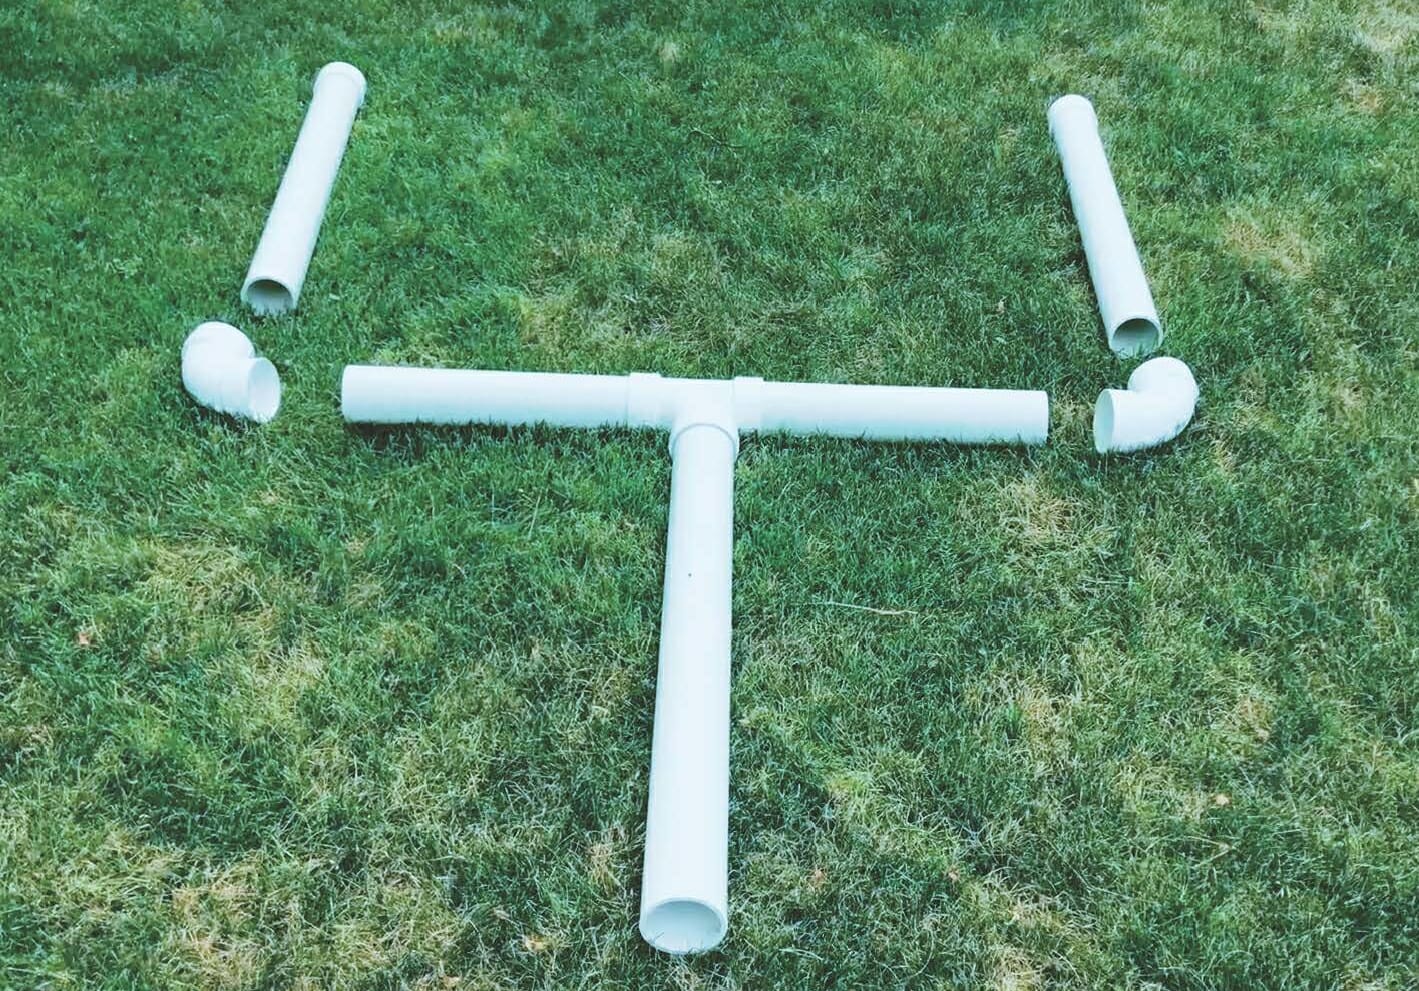 pieces of pvc laid out to create field goal posts